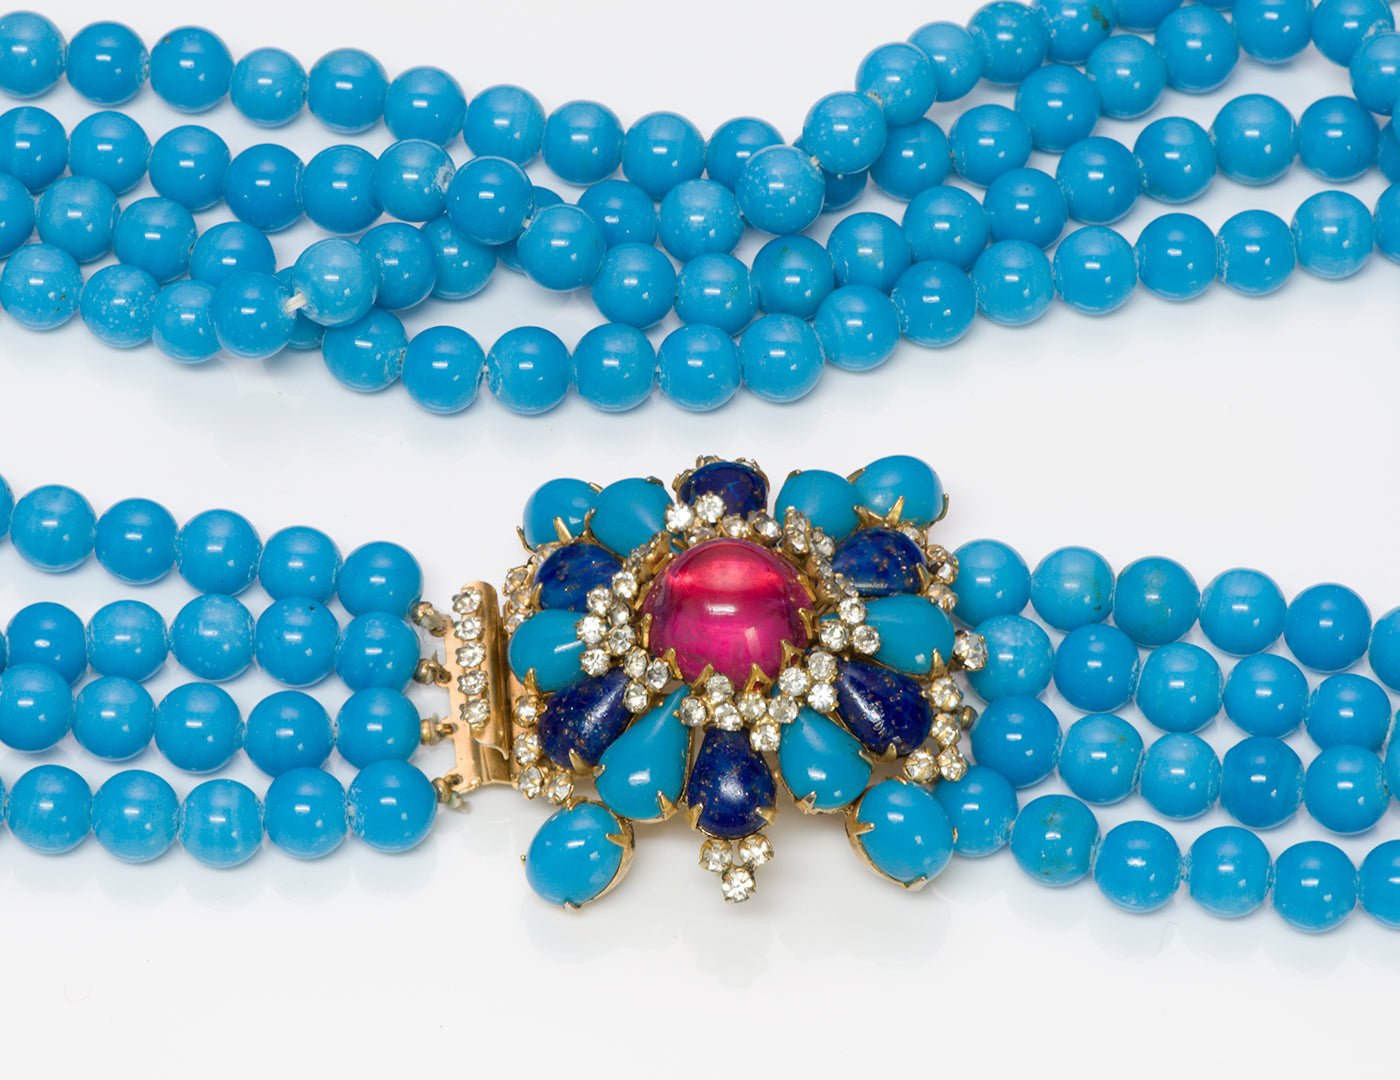 Vintage Arnold Scaasi Couture Blue Glass Beads Necklace